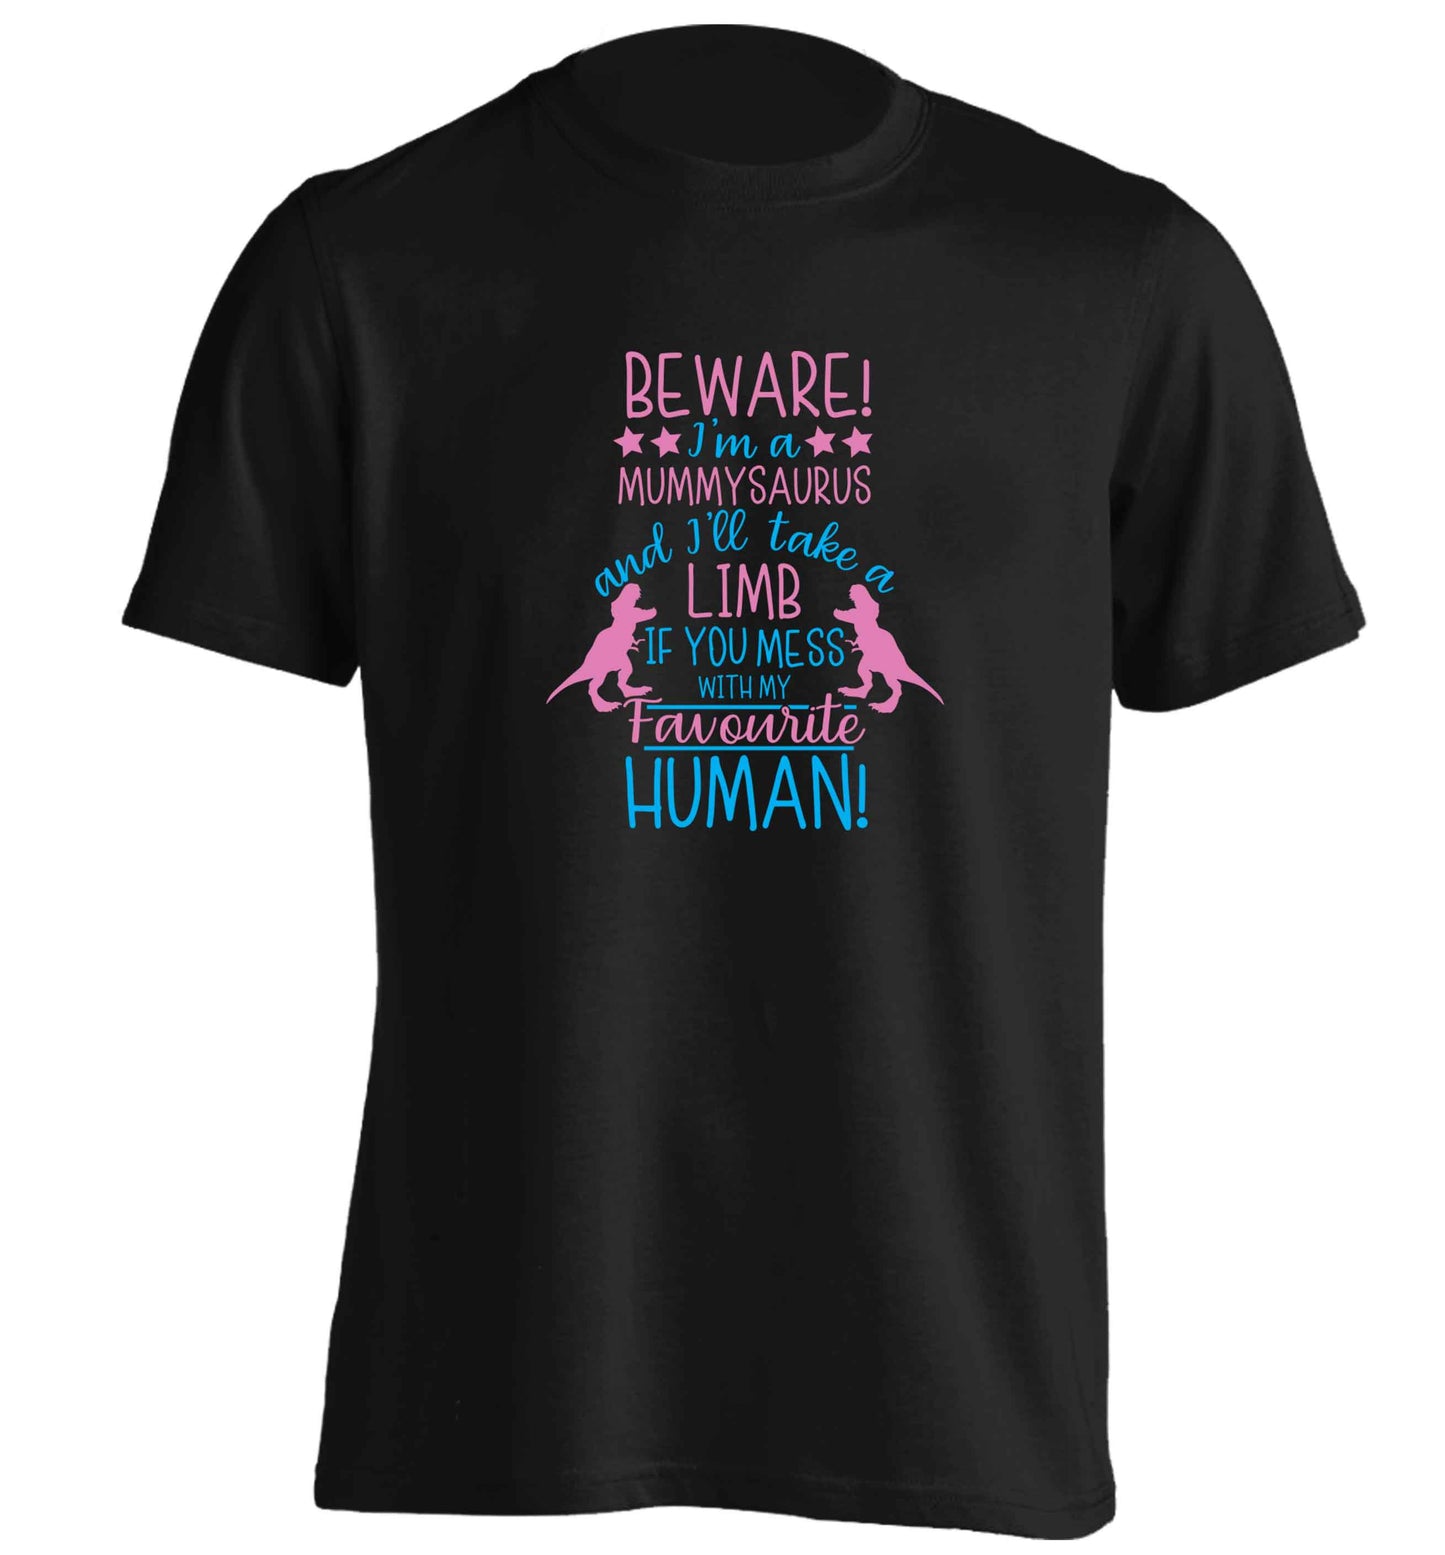 Perfect gift for any protective mummysaurus! Beware I'm a mummysaurus and I'll take a limb if you mess with my favourite human adults unisex black Tshirt 2XL